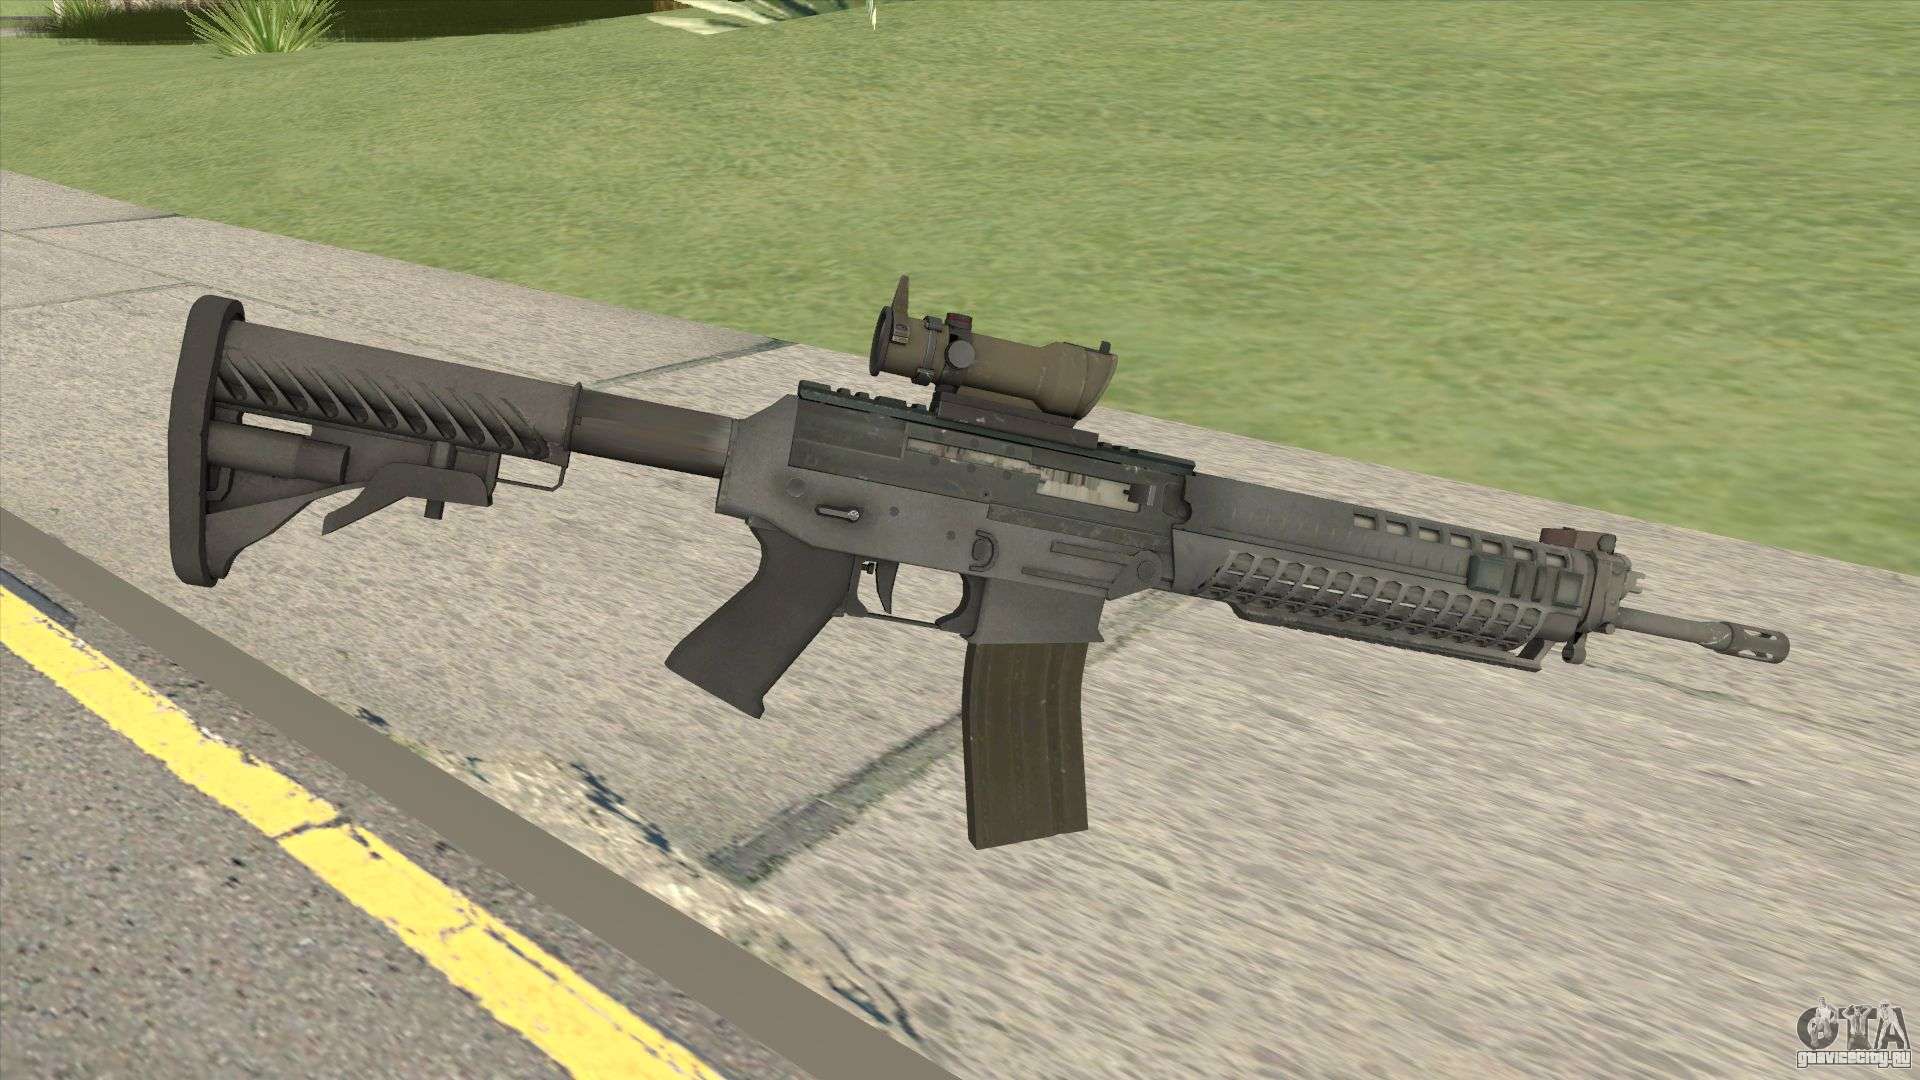 SG 553 Aerial cs go skin download the new version for android